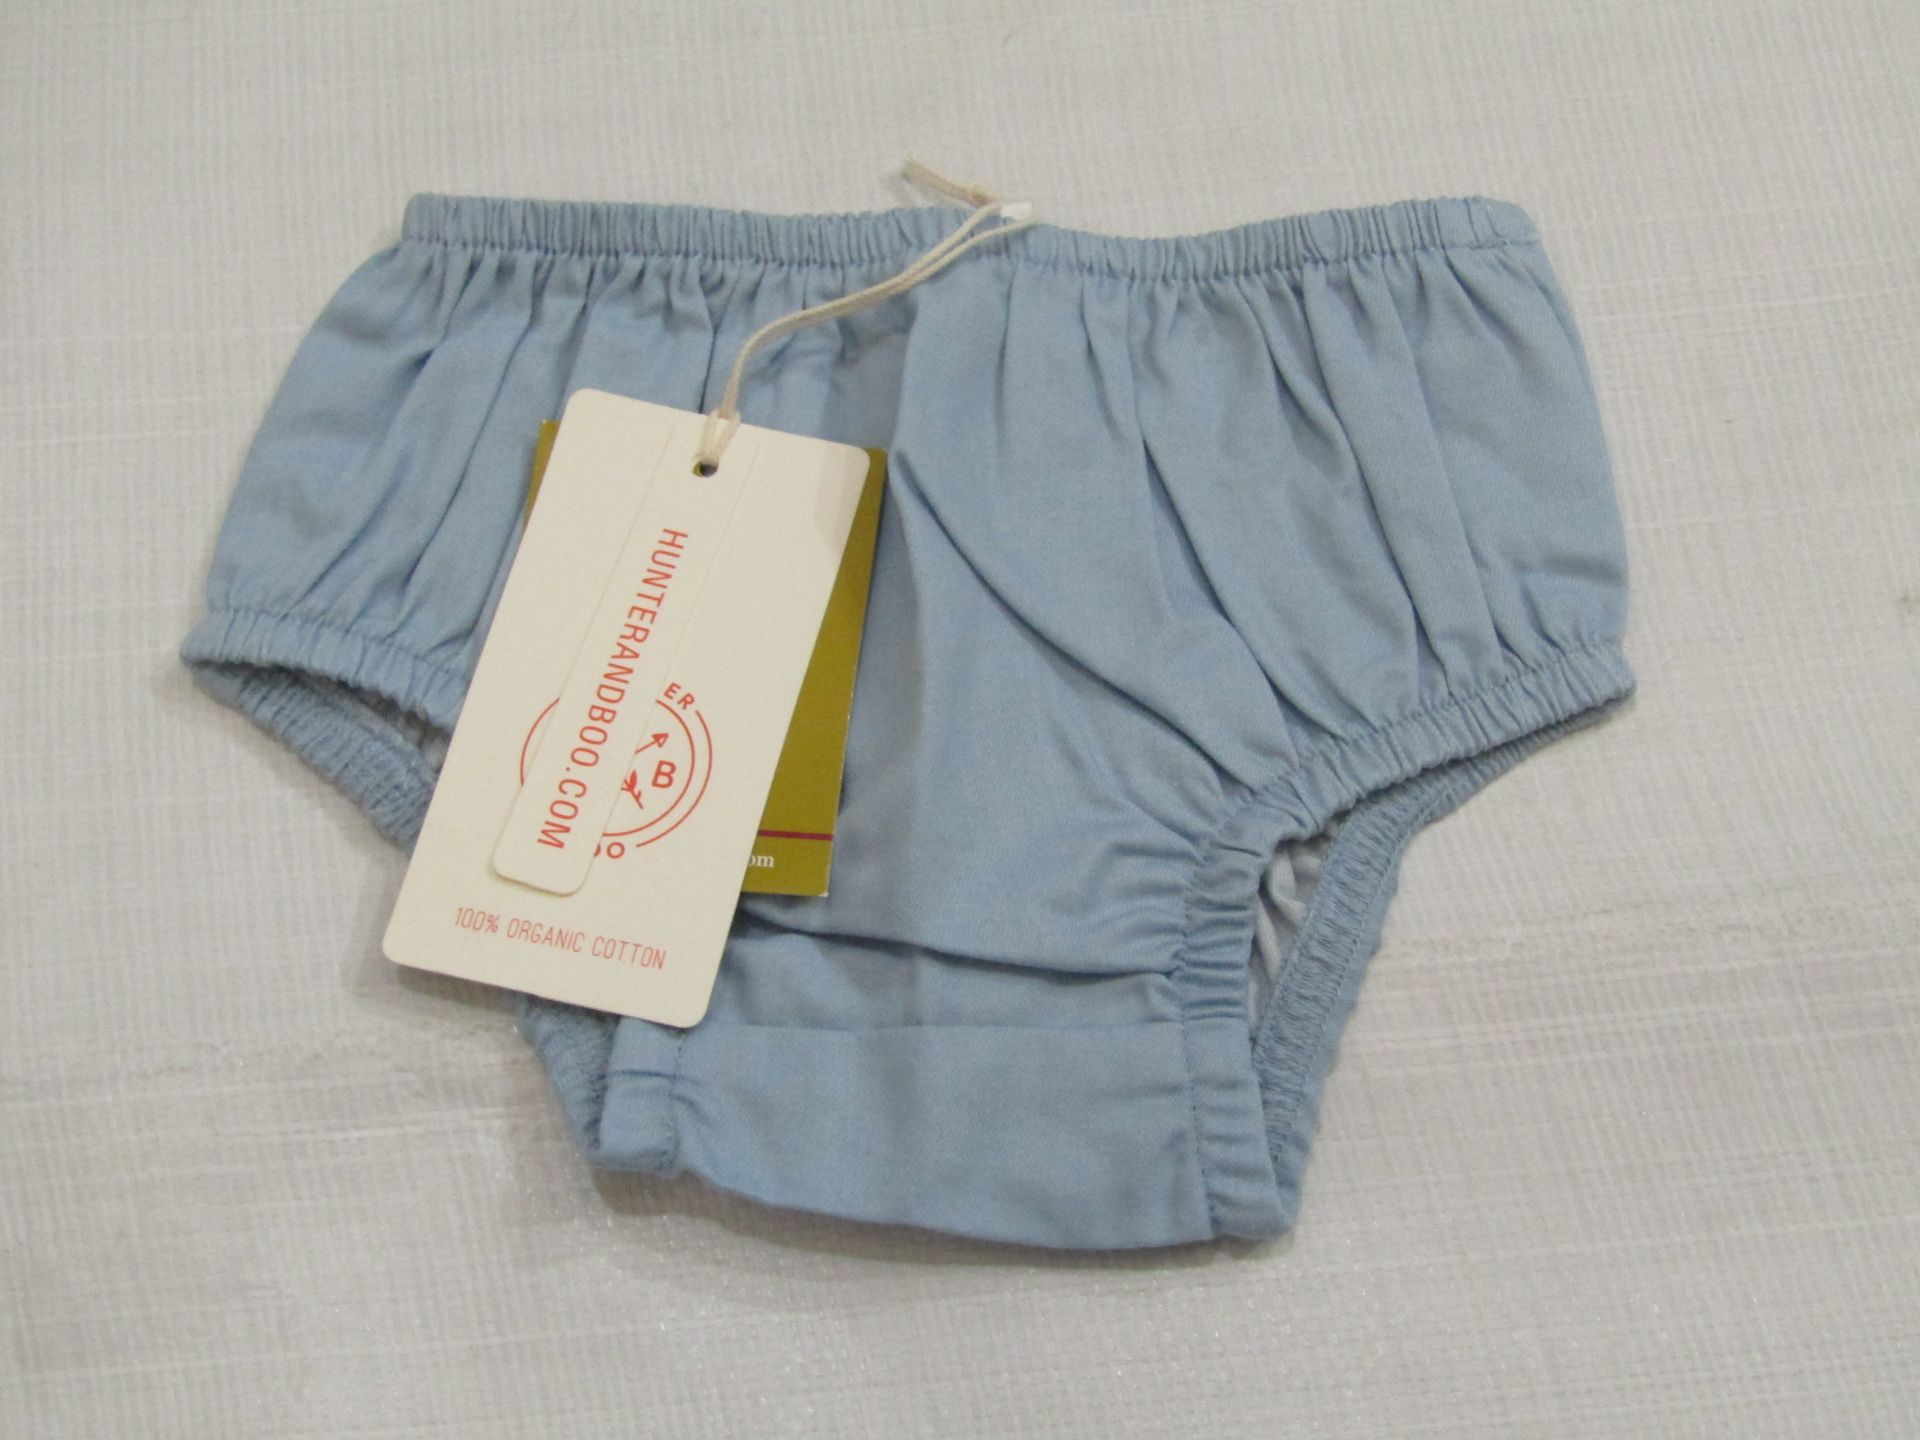 5 X Pairs of Chambray Bloomers Aged 0-3 Months New & Packaged RRP £8